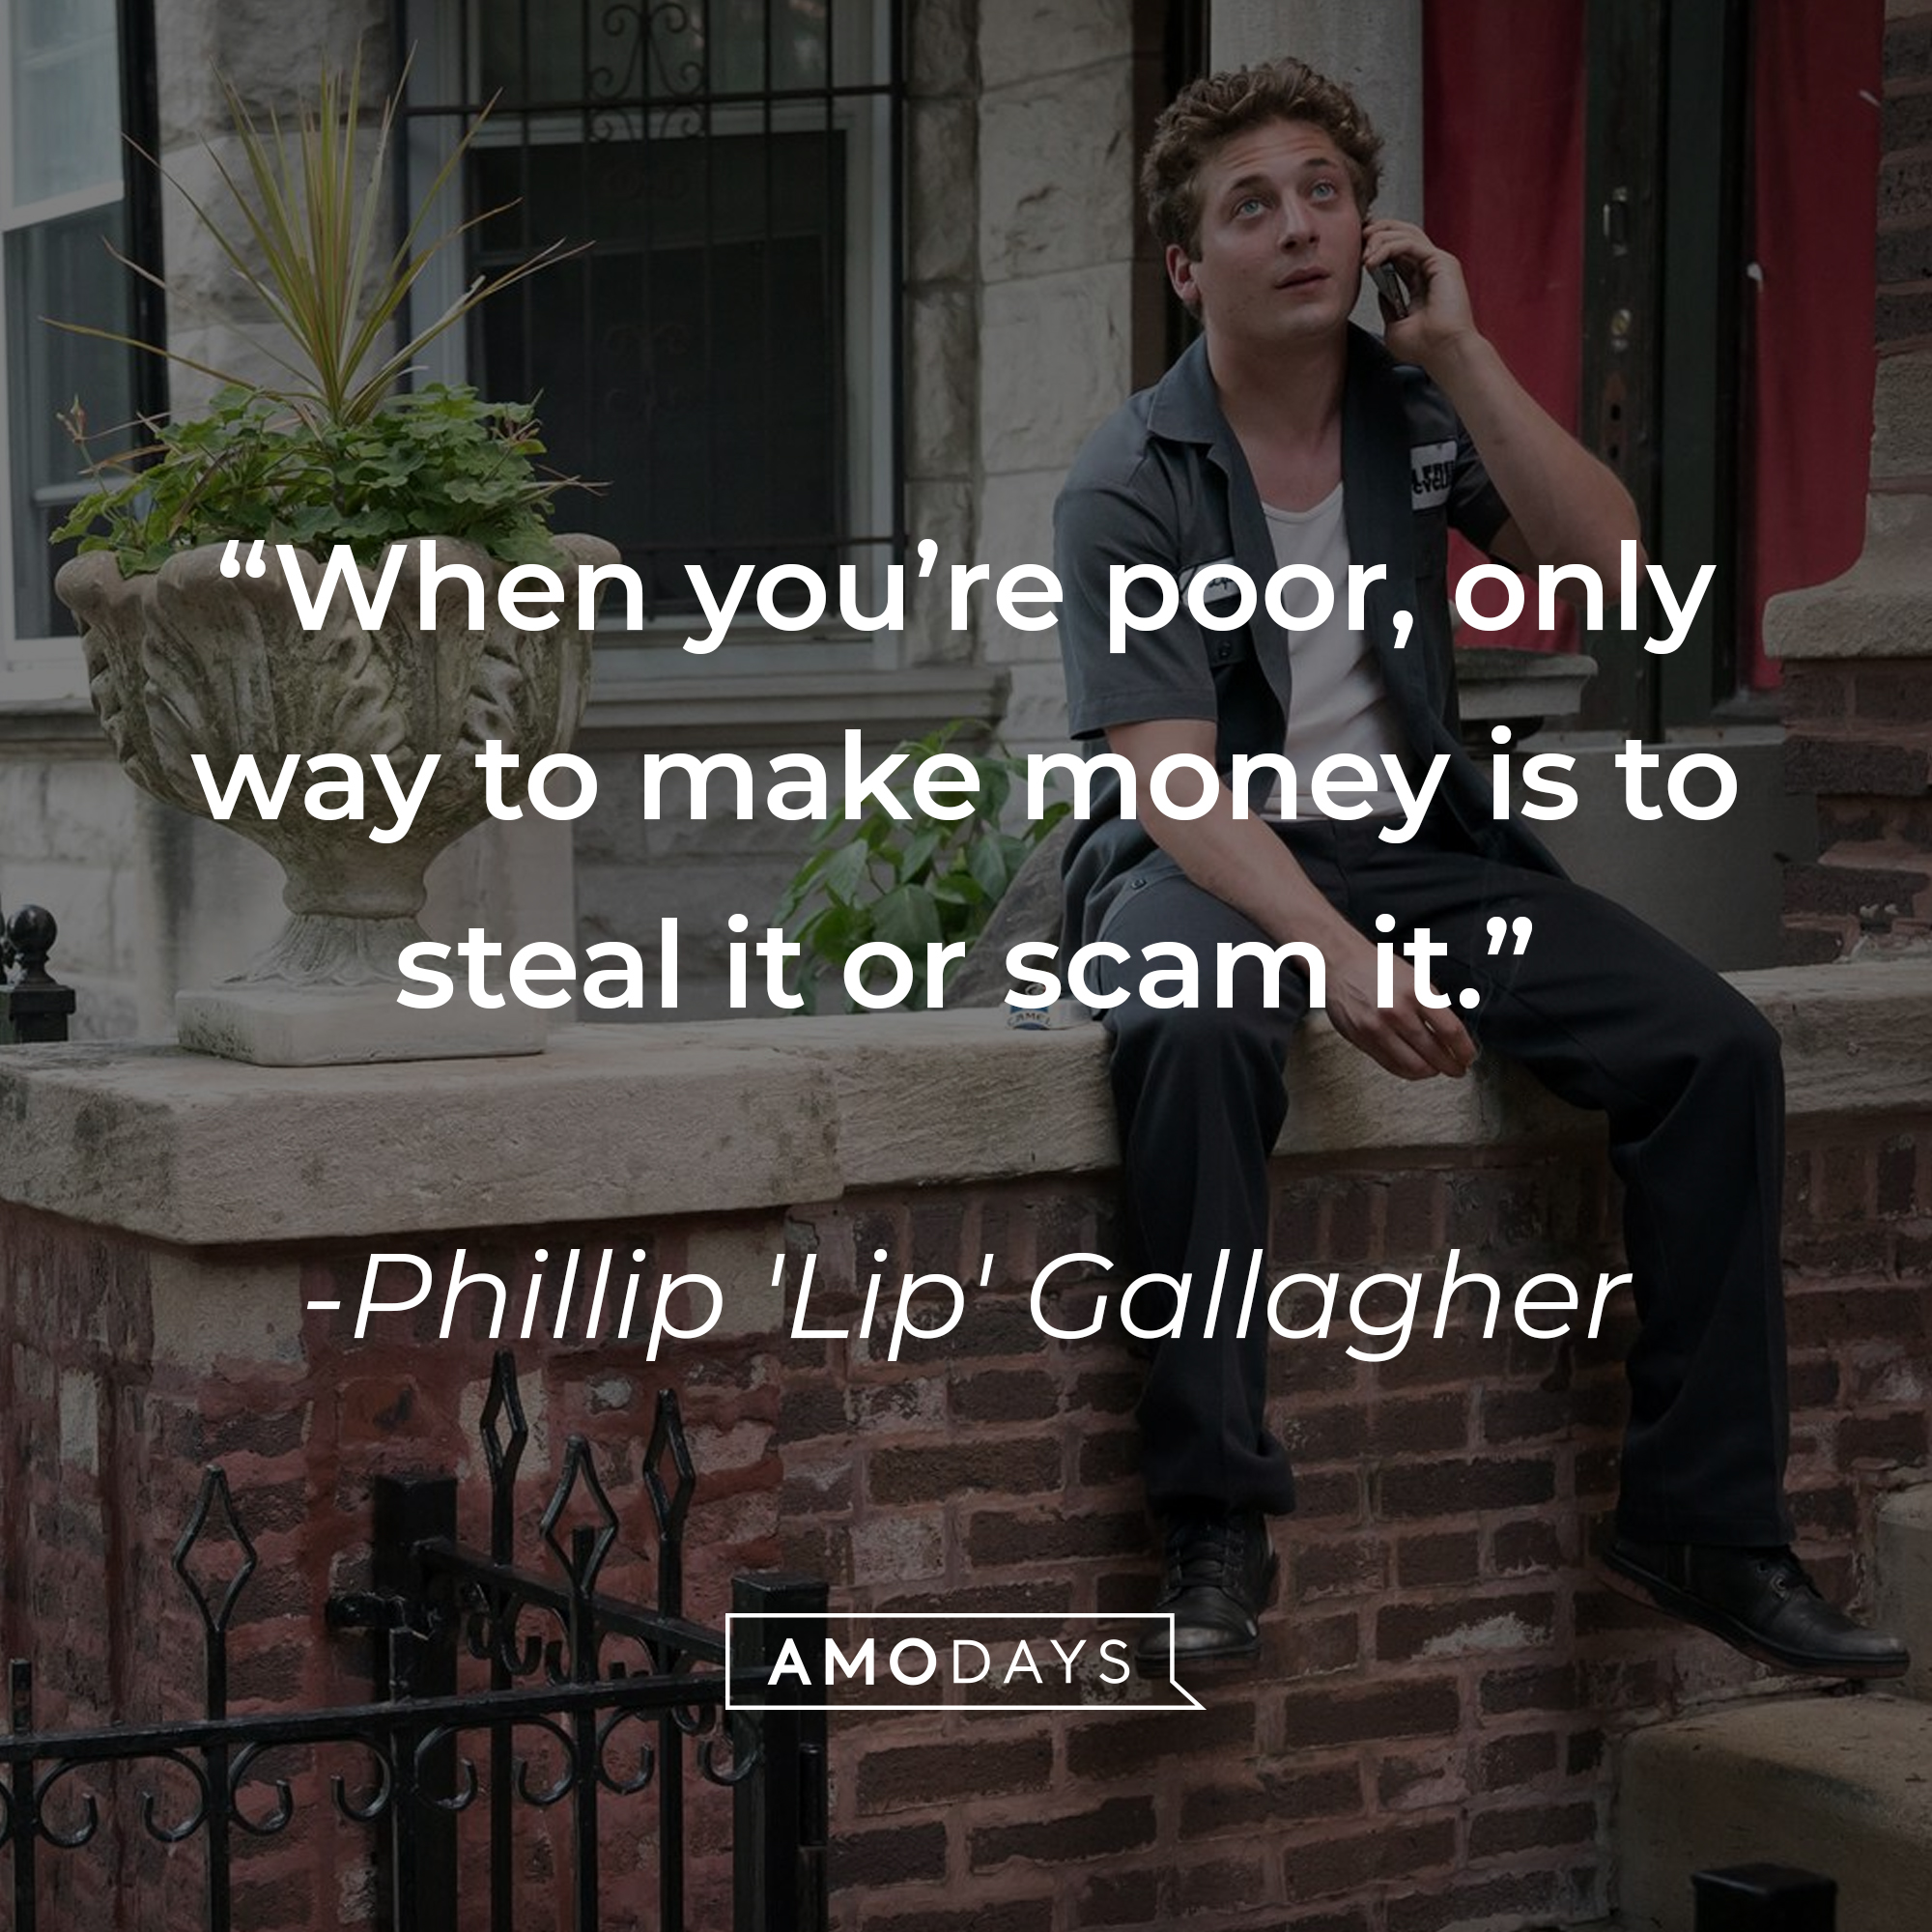 Phillip 'Lip' Gallagher with his quote: “When you’re poor, only way to make money is to steal it or scam it.” | Source: facebook.com/ShamelessOnShowtime